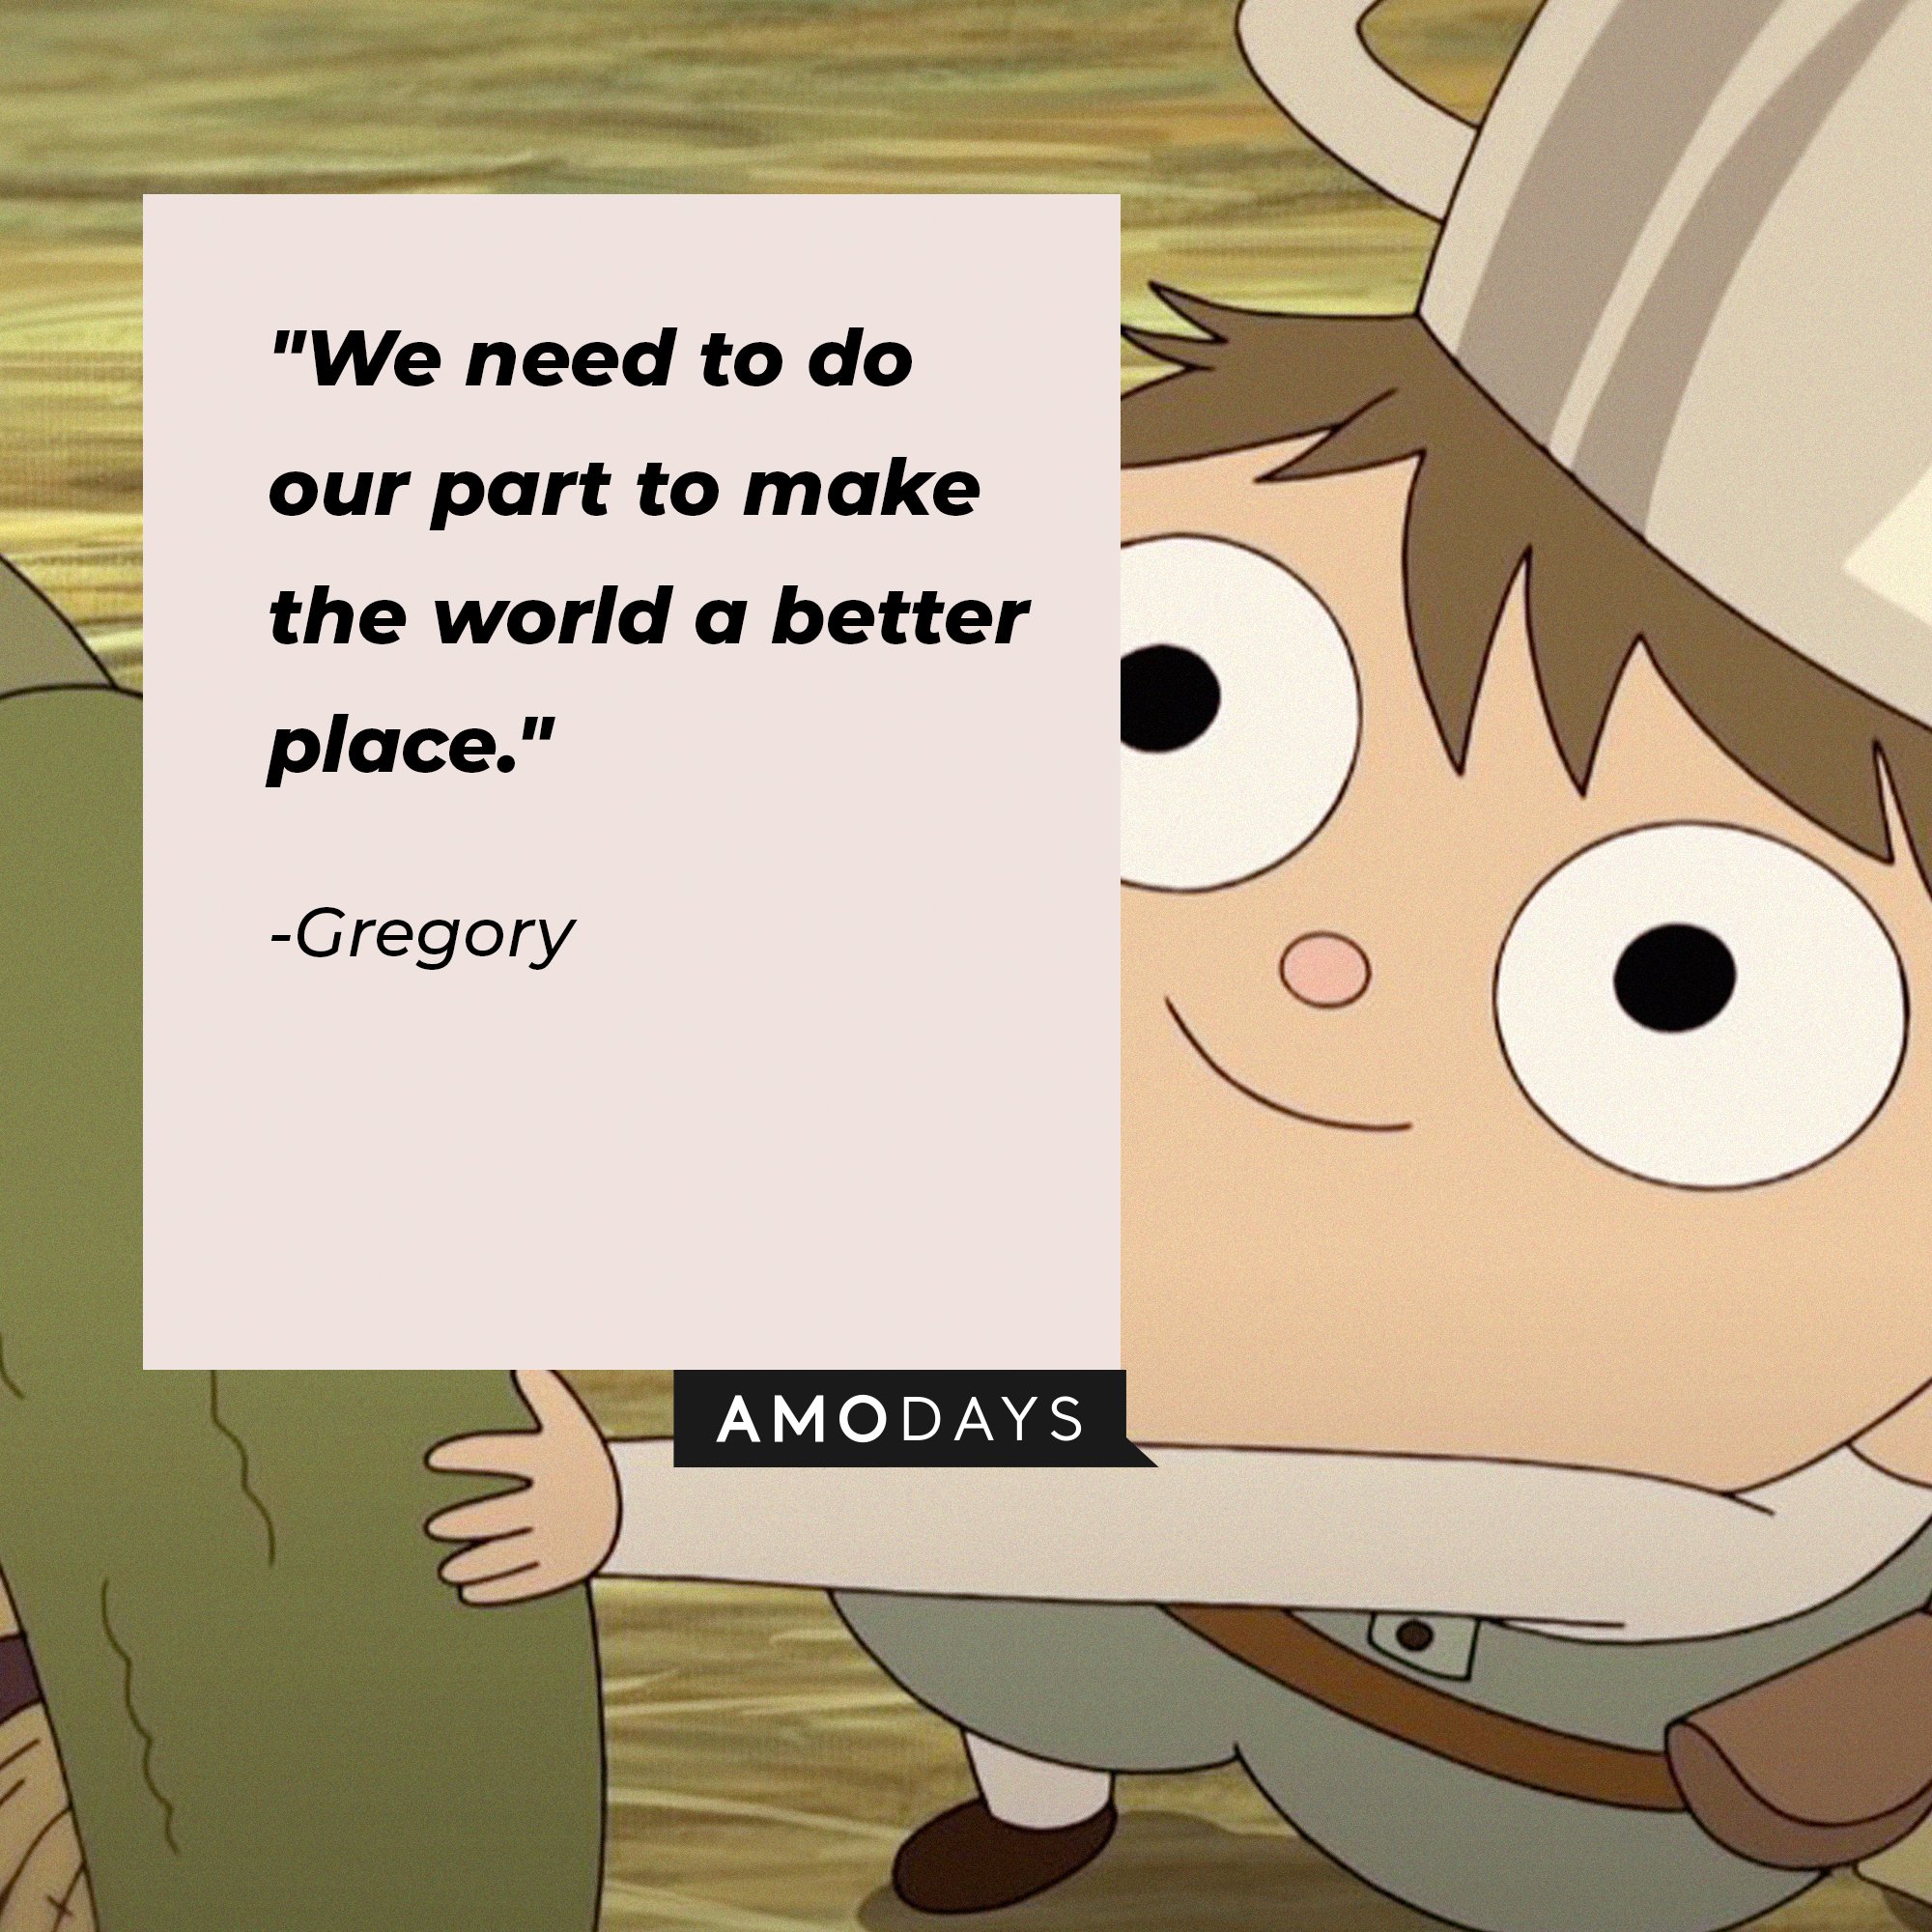 Gregory’s quote: "We need to do our part to make the world a better place." | Image: AmoDays